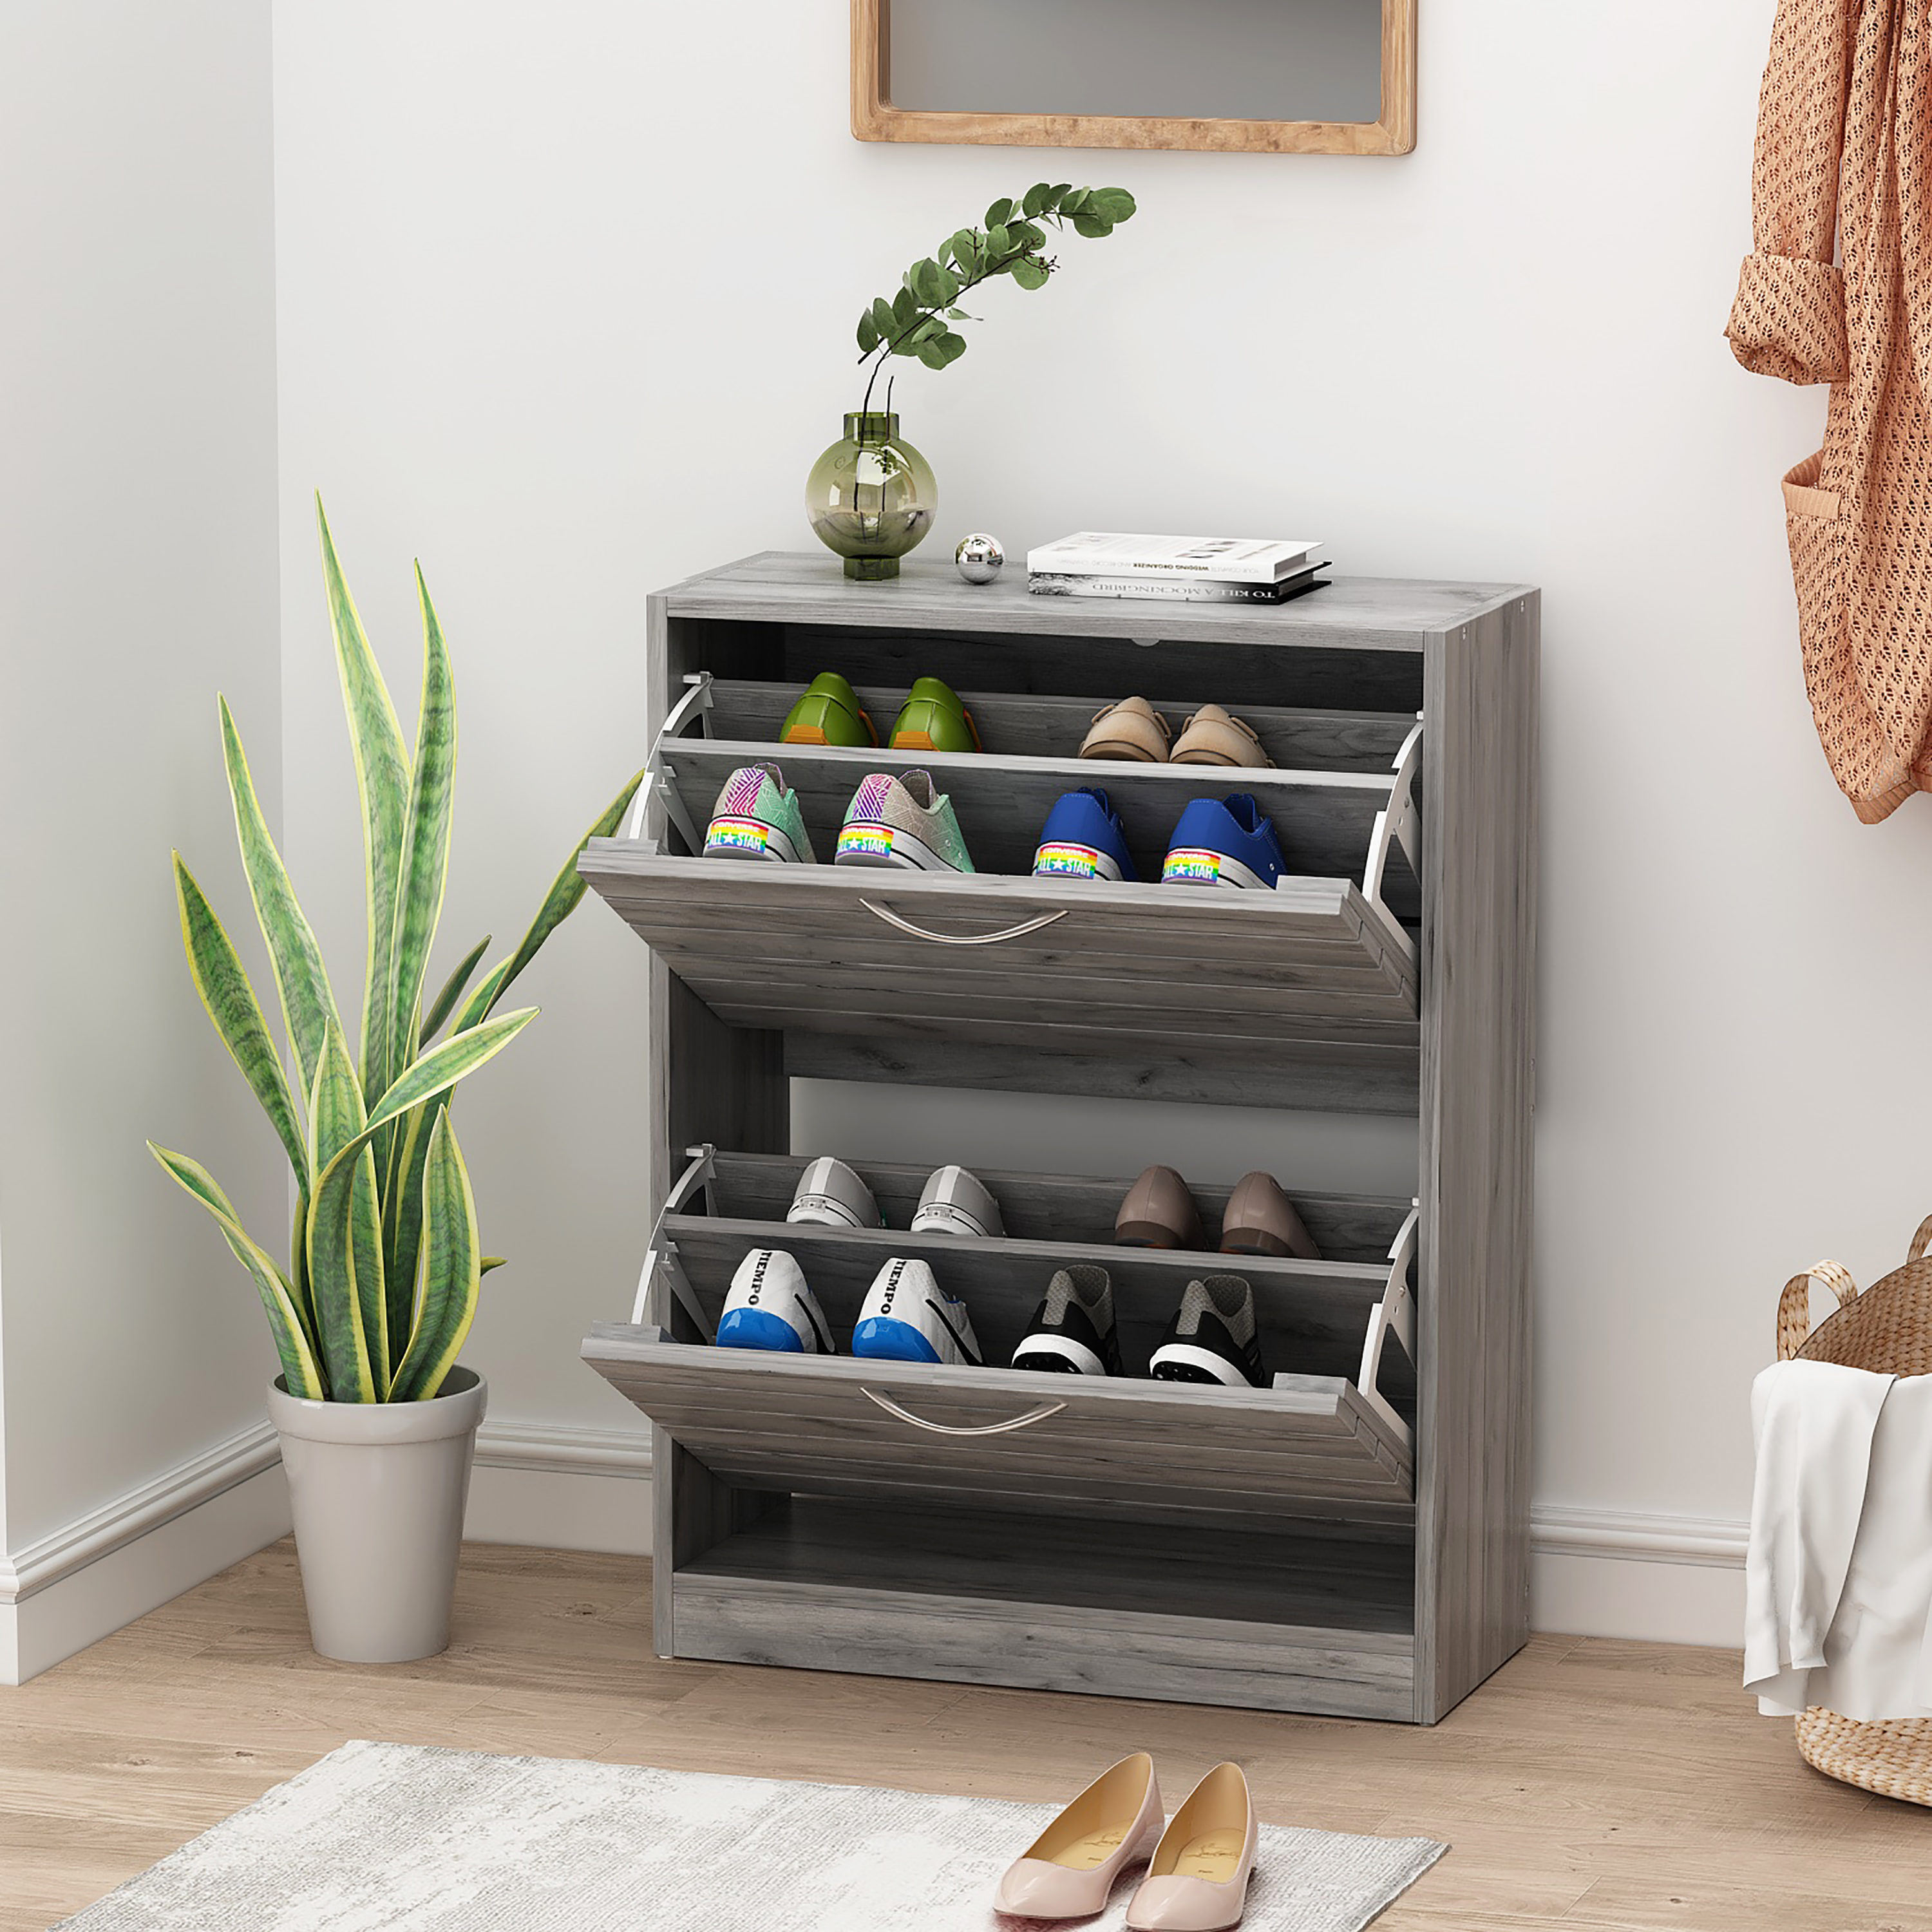 9 Tier 30 Pairs Shoe Rack Tower Cabinet with Cover Organizer Storage Shelf  Hot